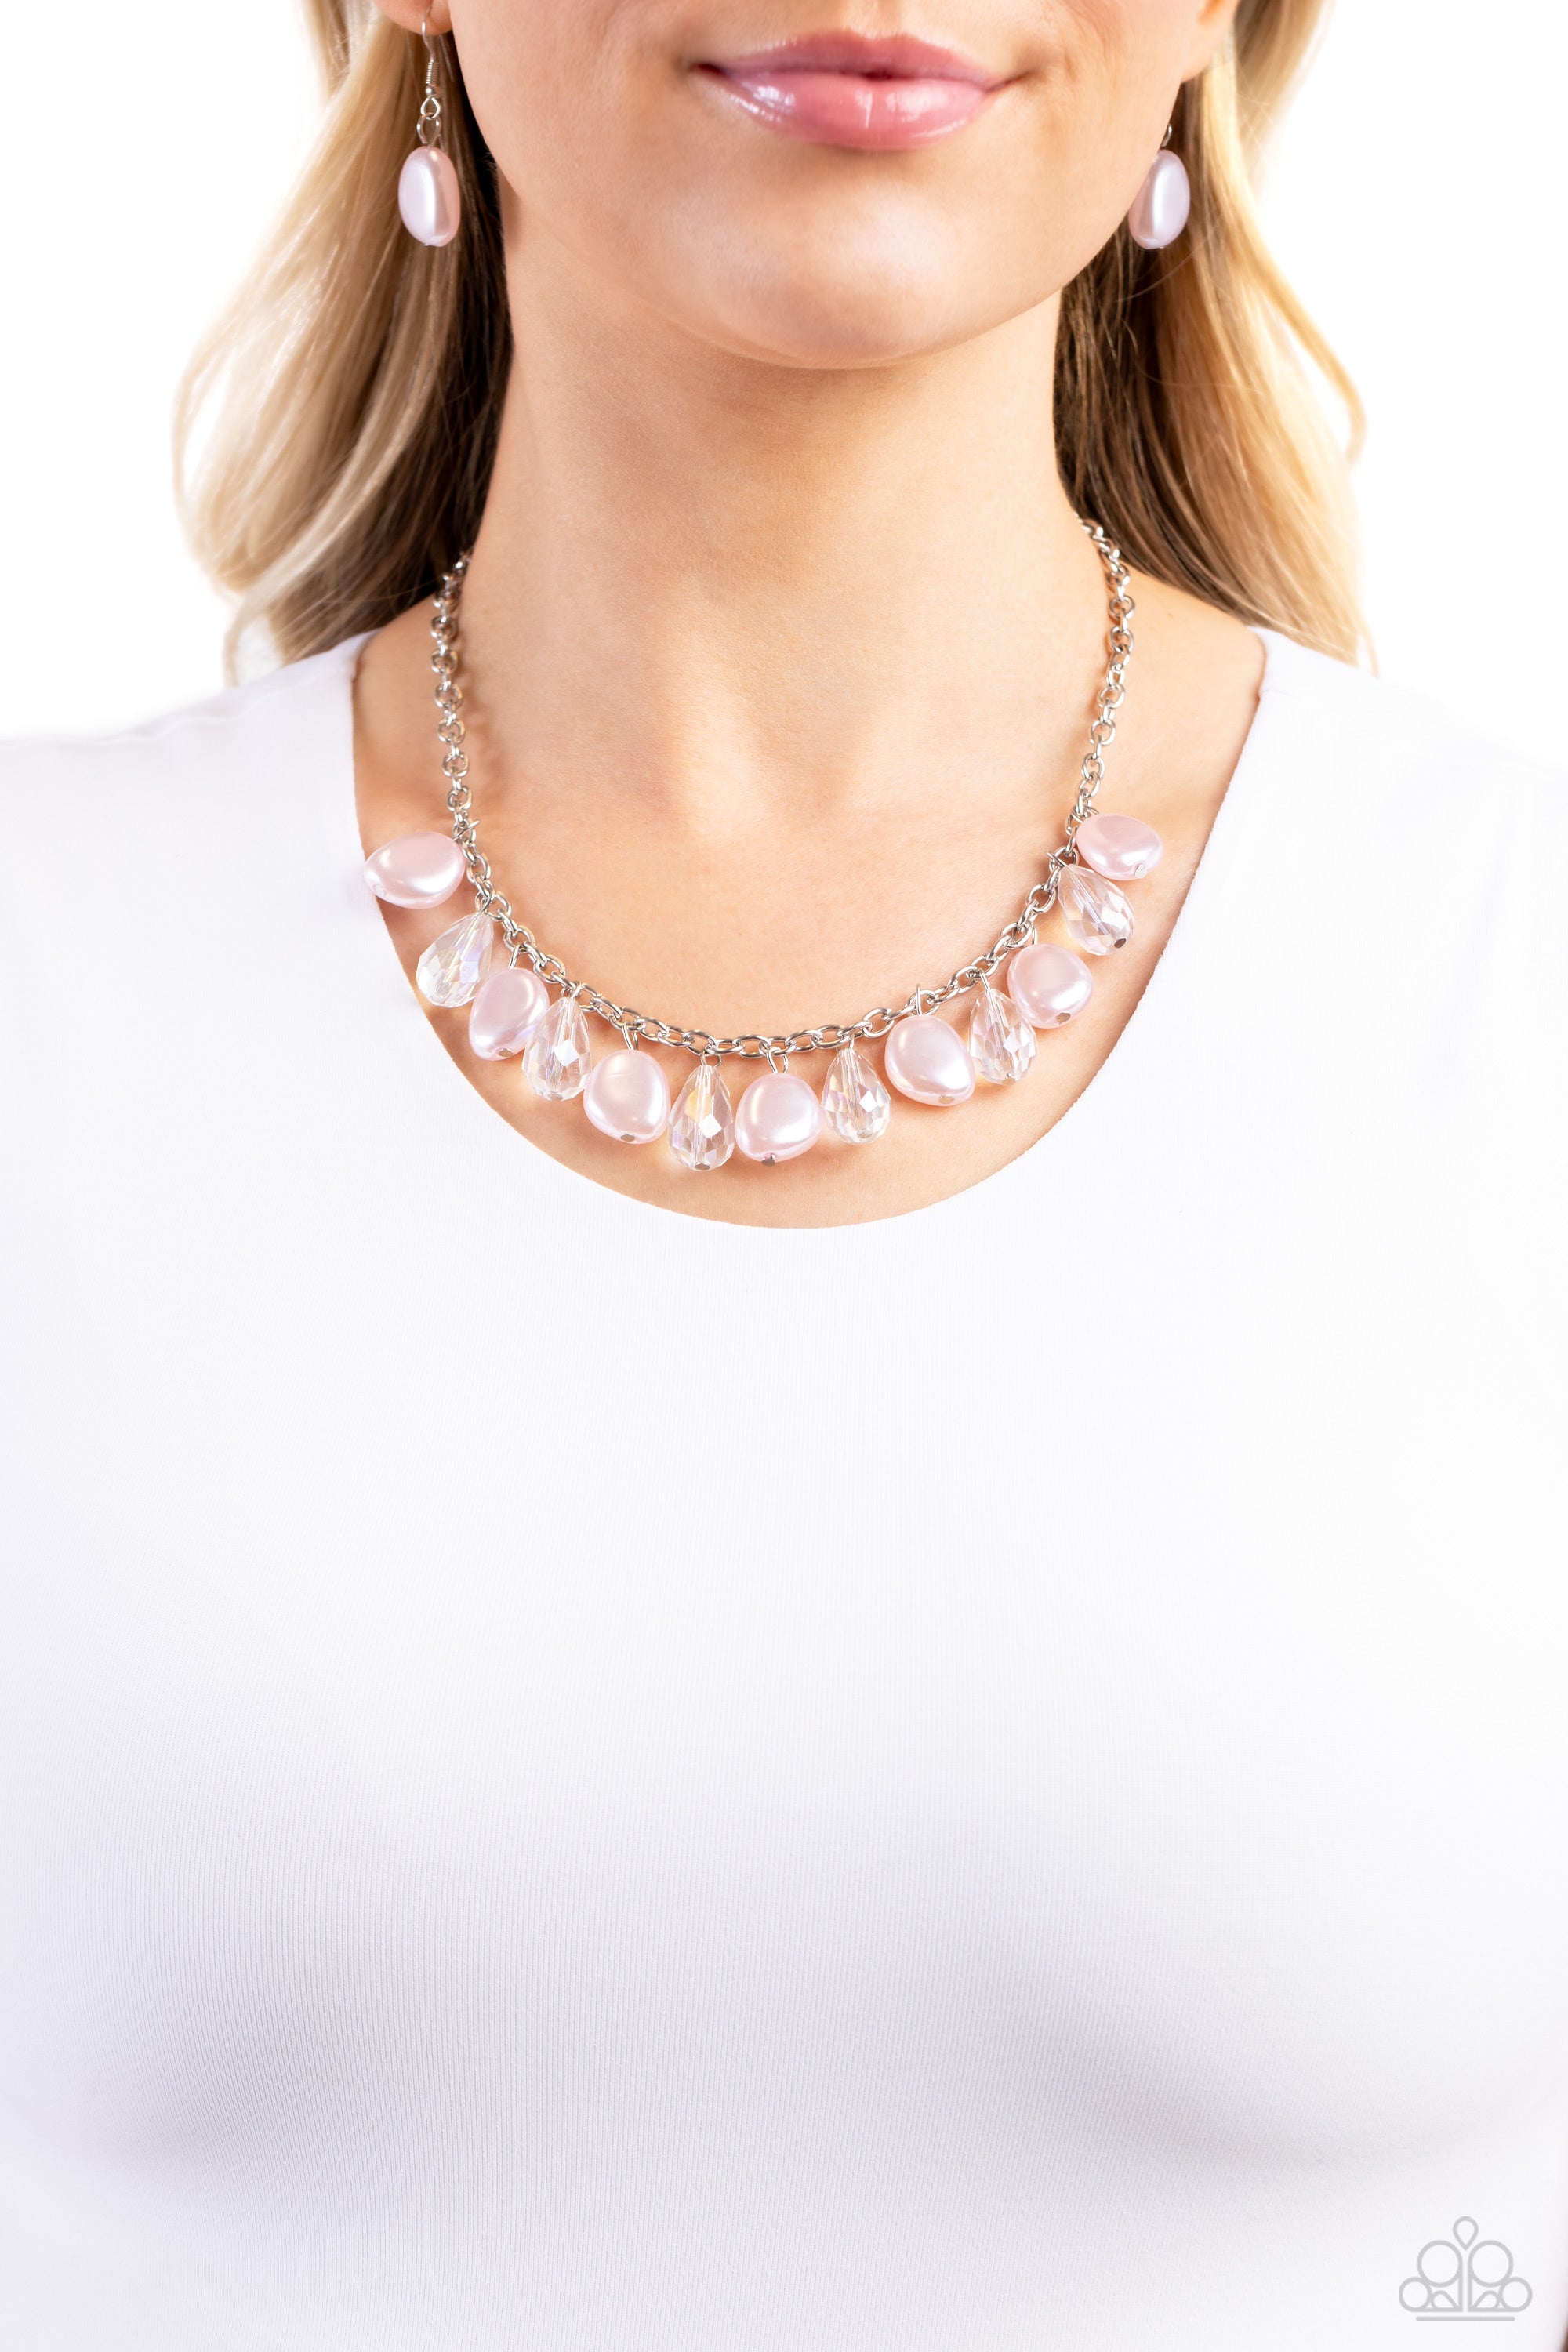 WELCOME TO BALL STREET PINK-NECKLACE